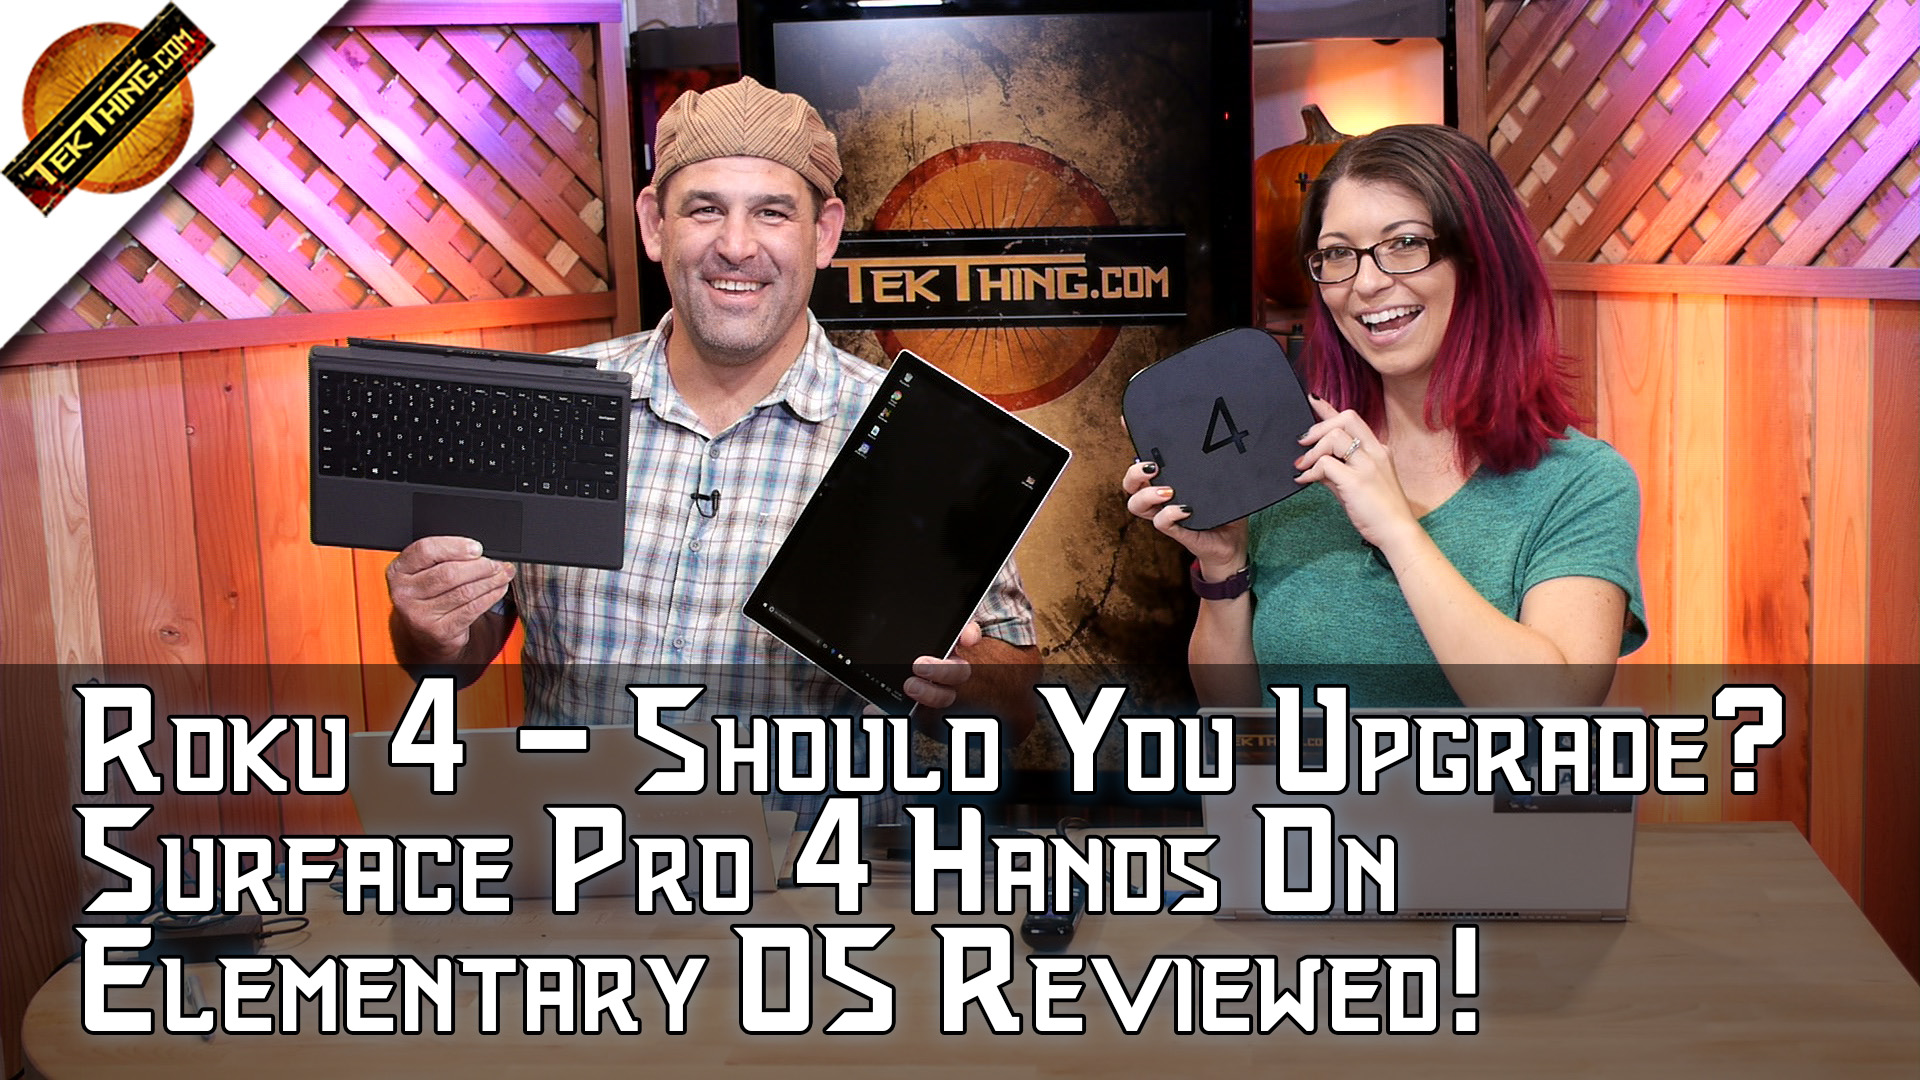 TekThing 43: Roku 4: Should You Upgrade? Surface Pro 4 Hands On, Elementary OS, DMCA Exemptions, HTPC Keyboard!